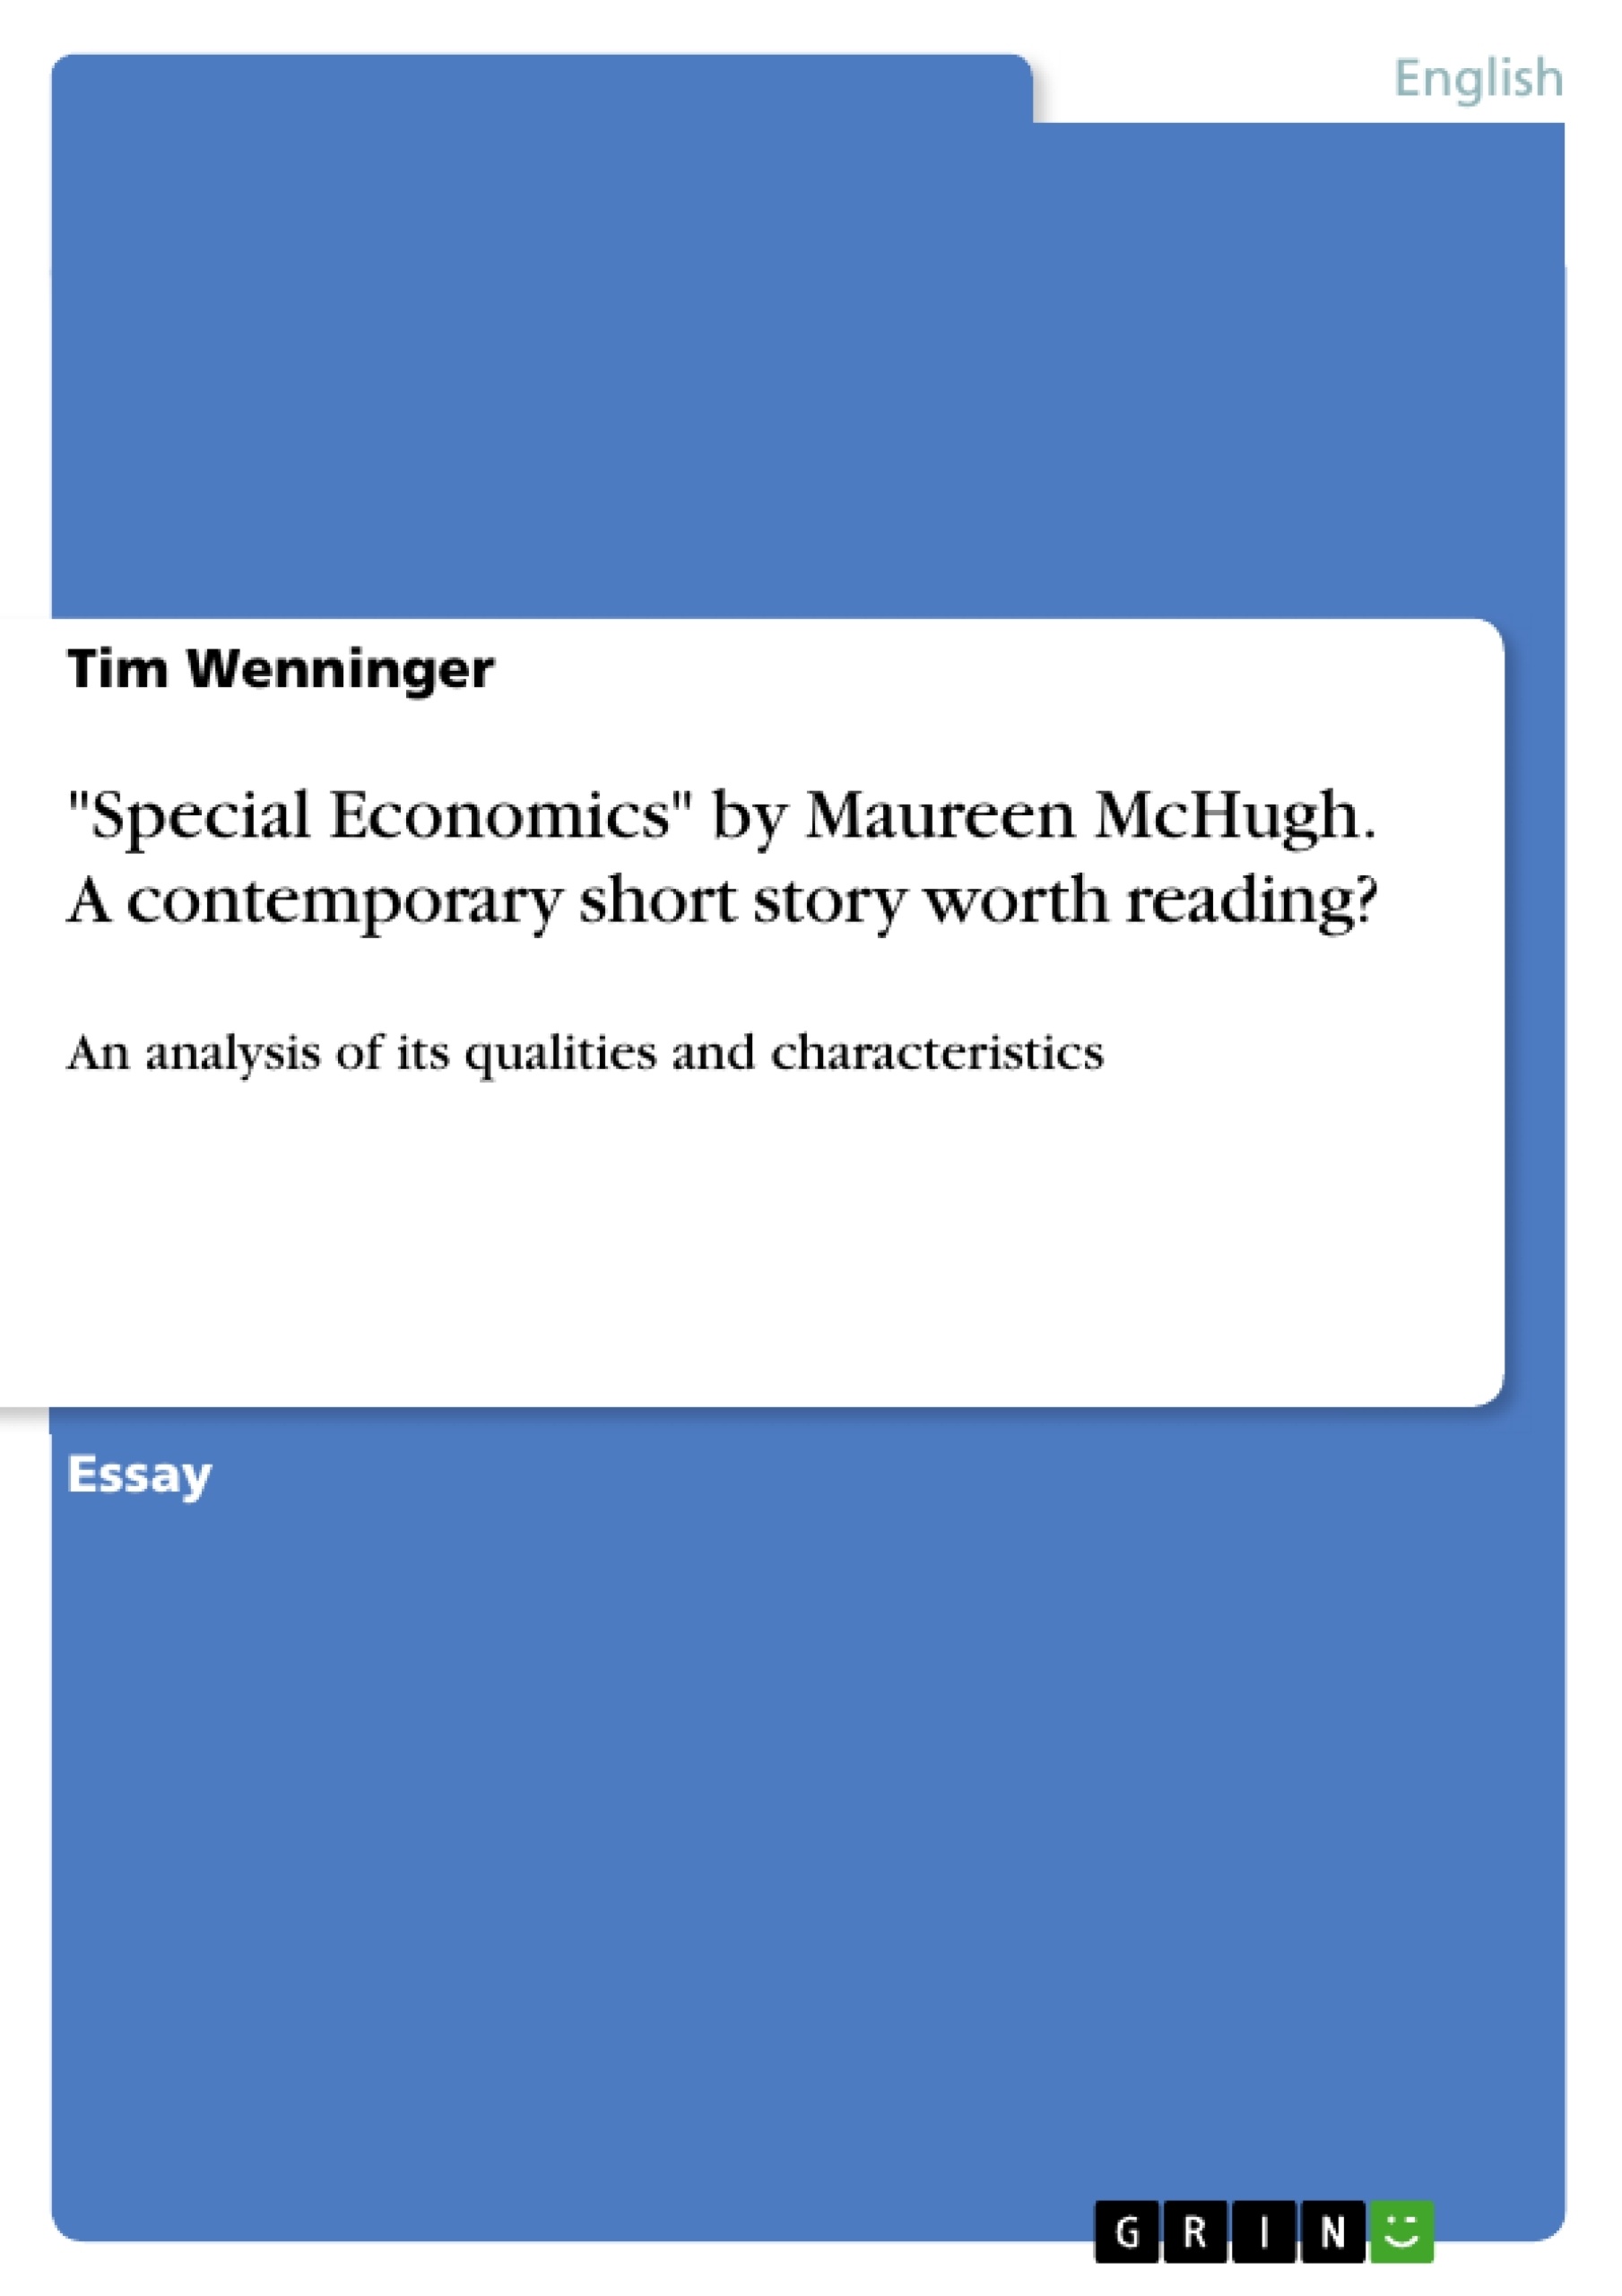 Título: "Special Economics" by Maureen McHugh. A contemporary short story worth reading?